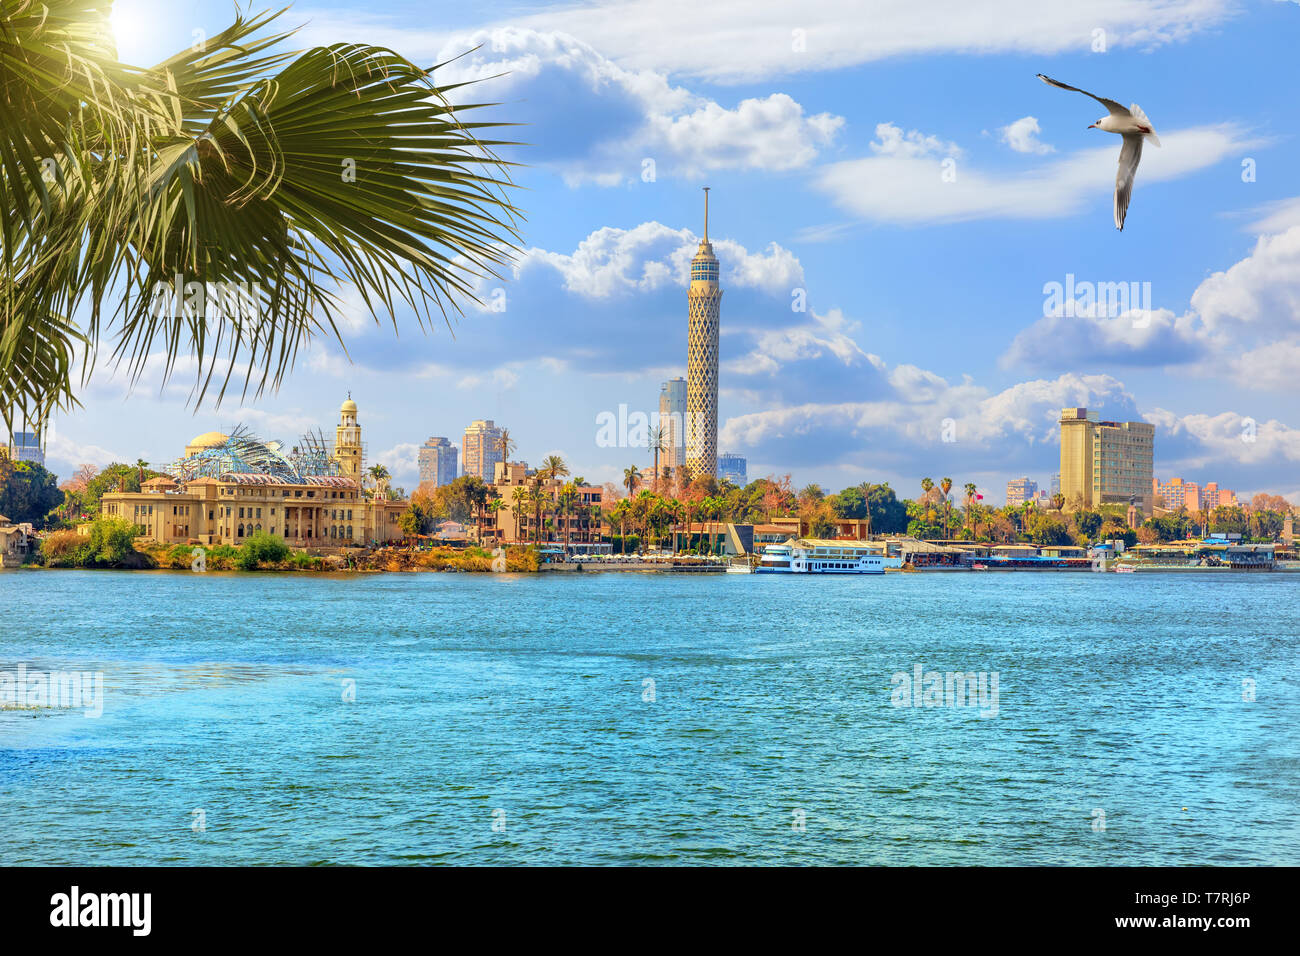 The Cairo tower, beautiful view from the Nile river, Egypt Stock Photo